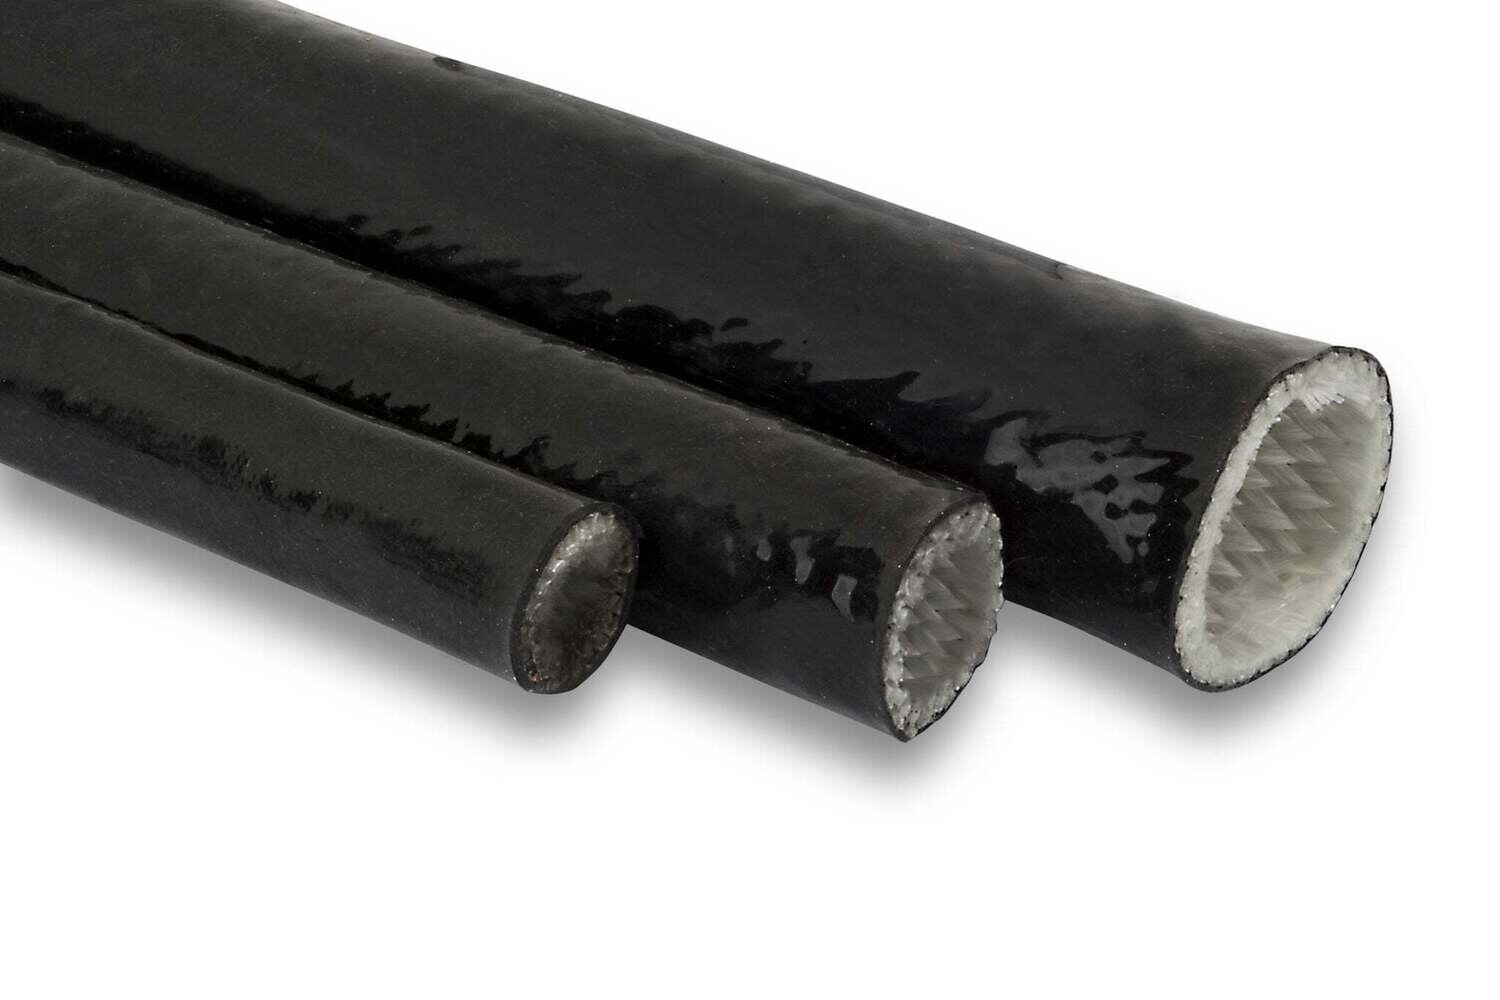 Black Silicon High Heat Sleeve - 7mm, 1.0m Multiple Qty will come on a continuous Roll